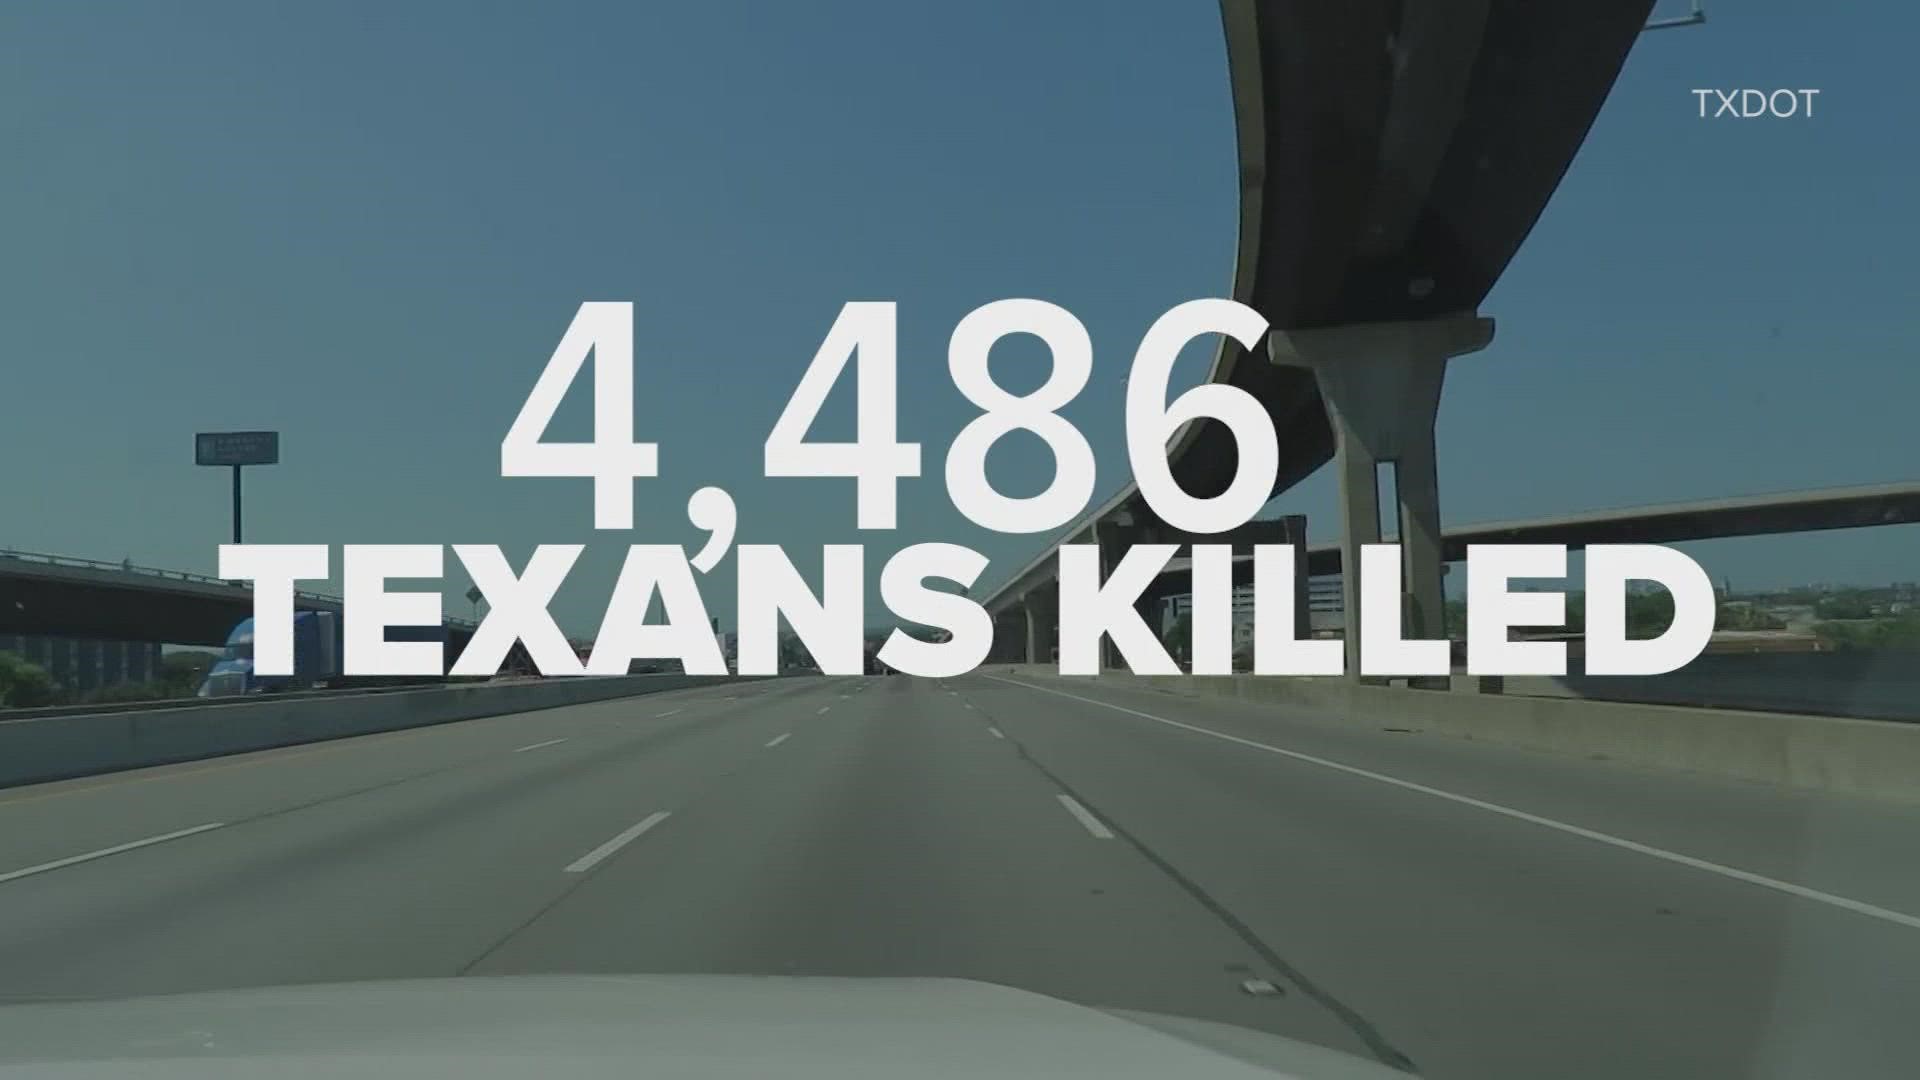 Despite more people staying home during the pandemic, 2021 proved to be one of the deadliest years on Texas roadways.